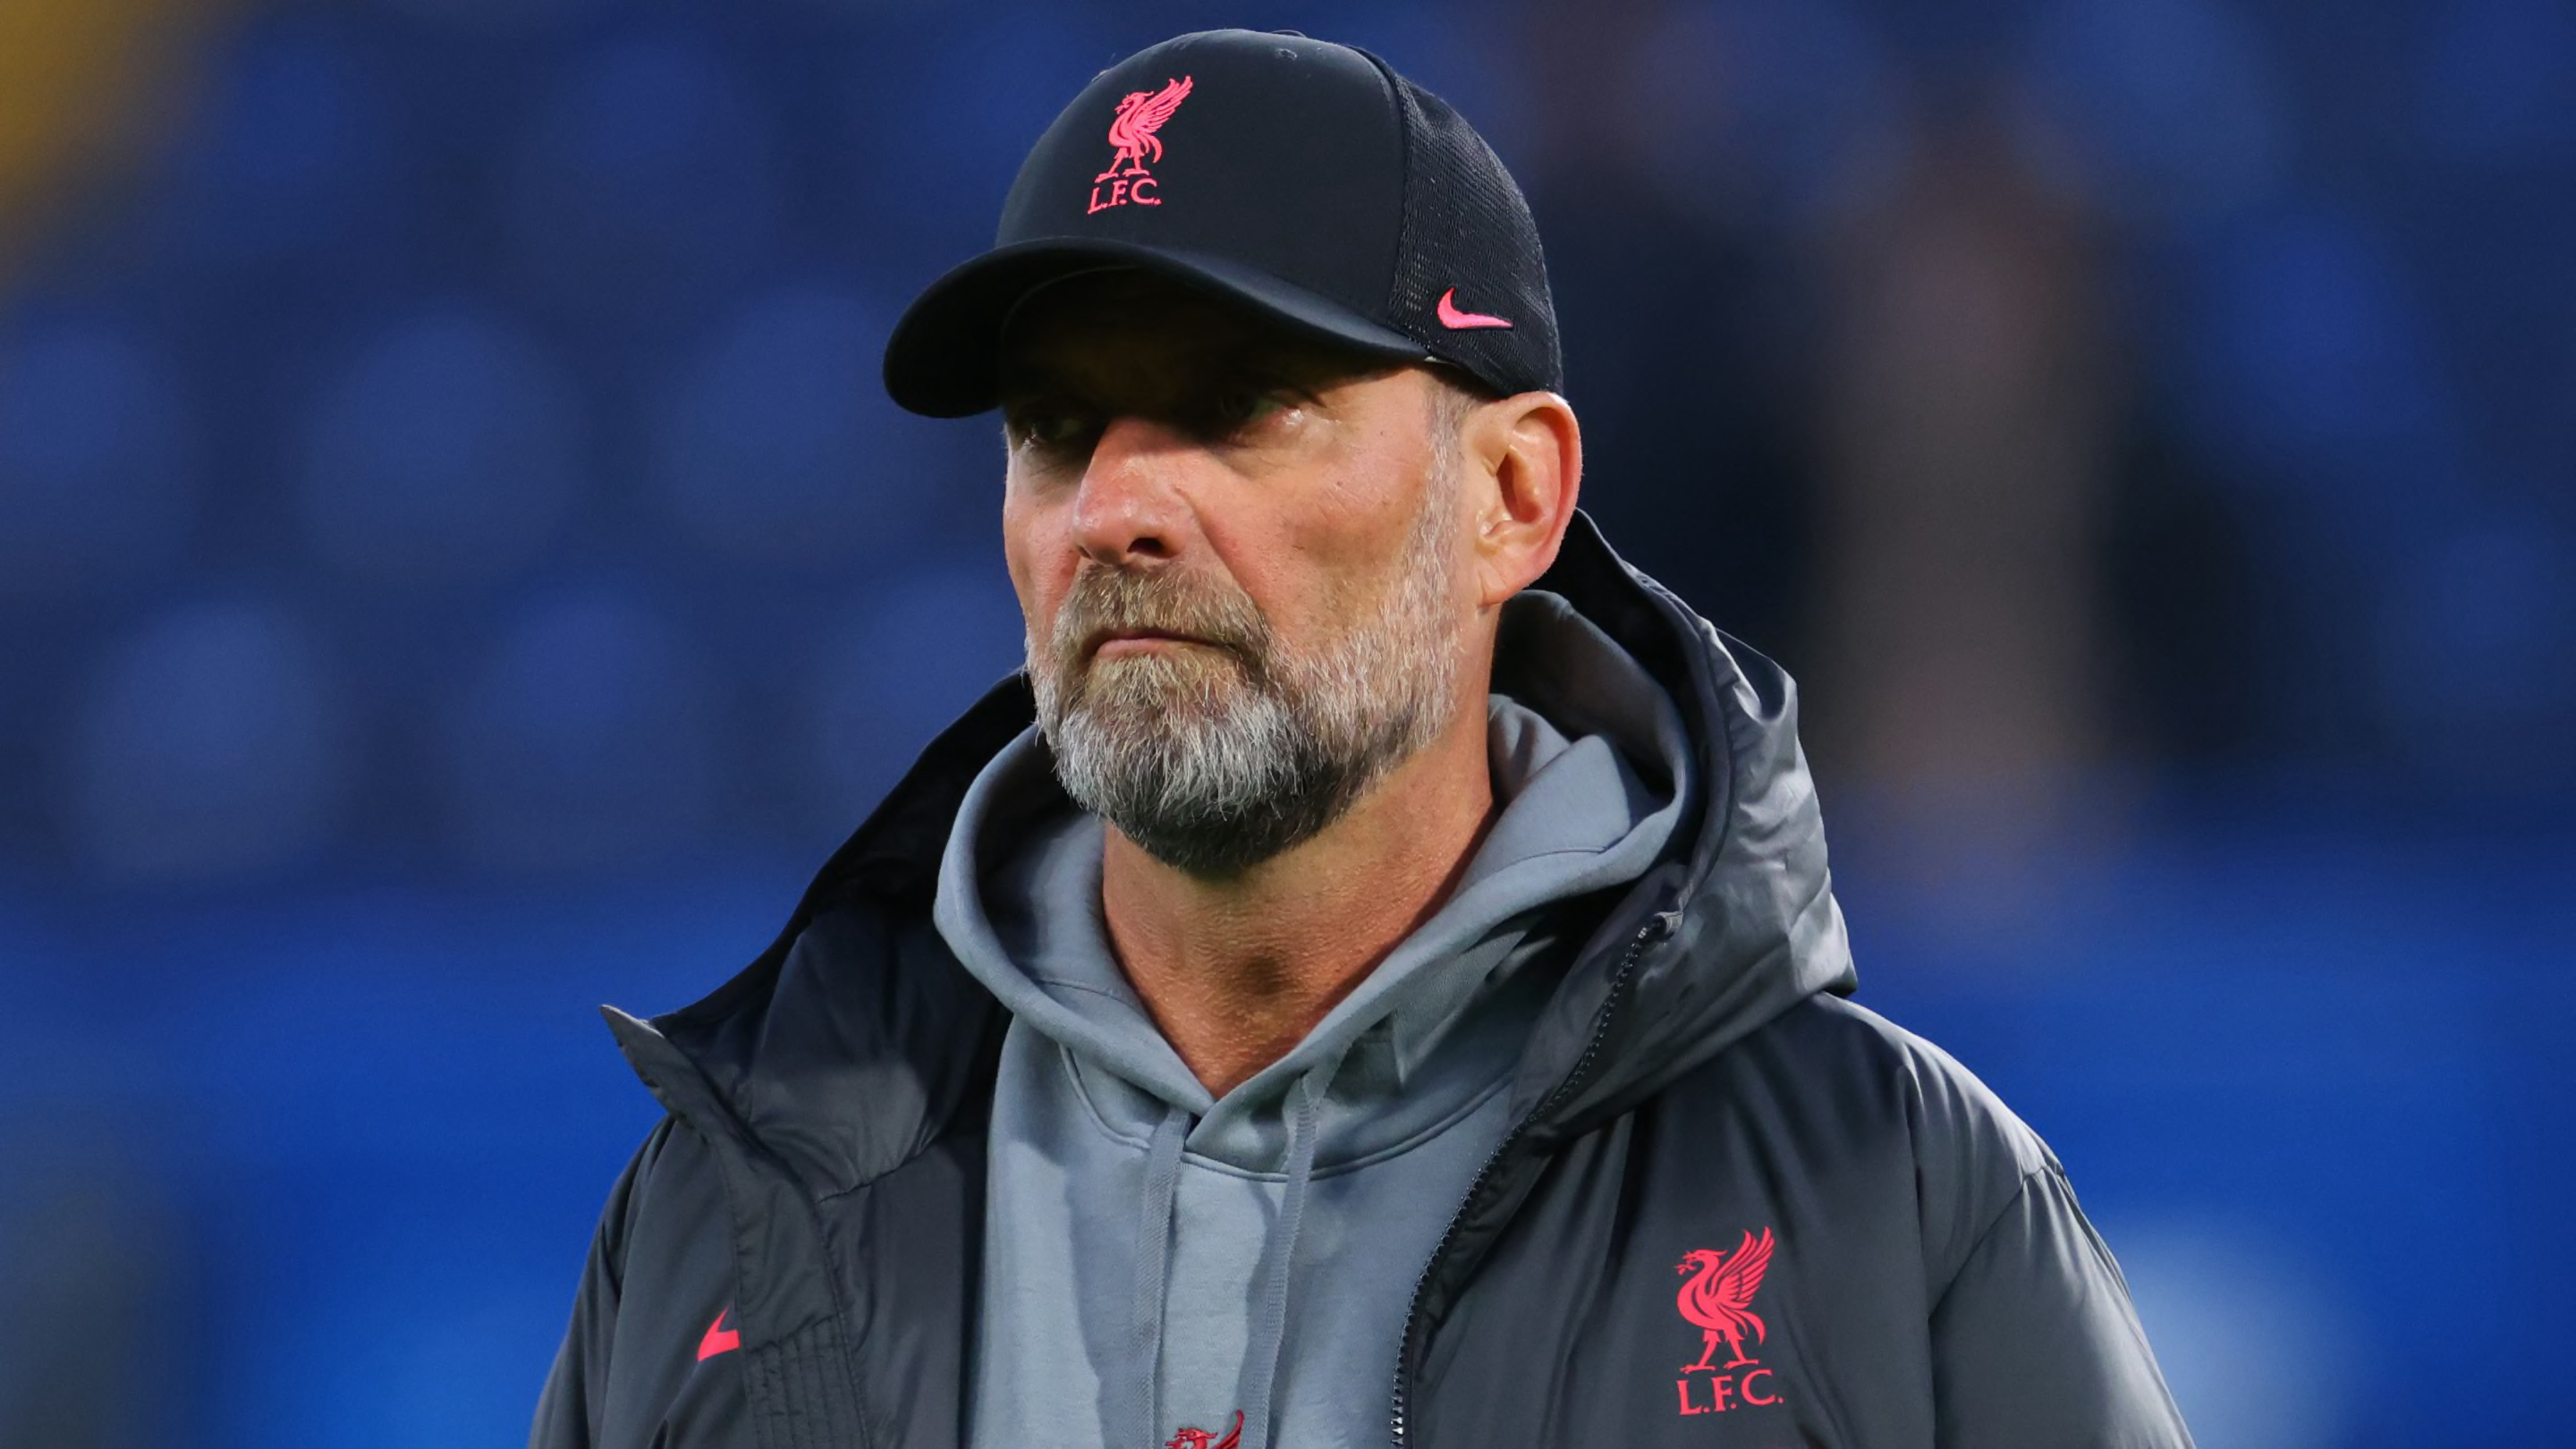 Jurgen Klopp hits out at 'waste of time' questions about Liverpool rotation